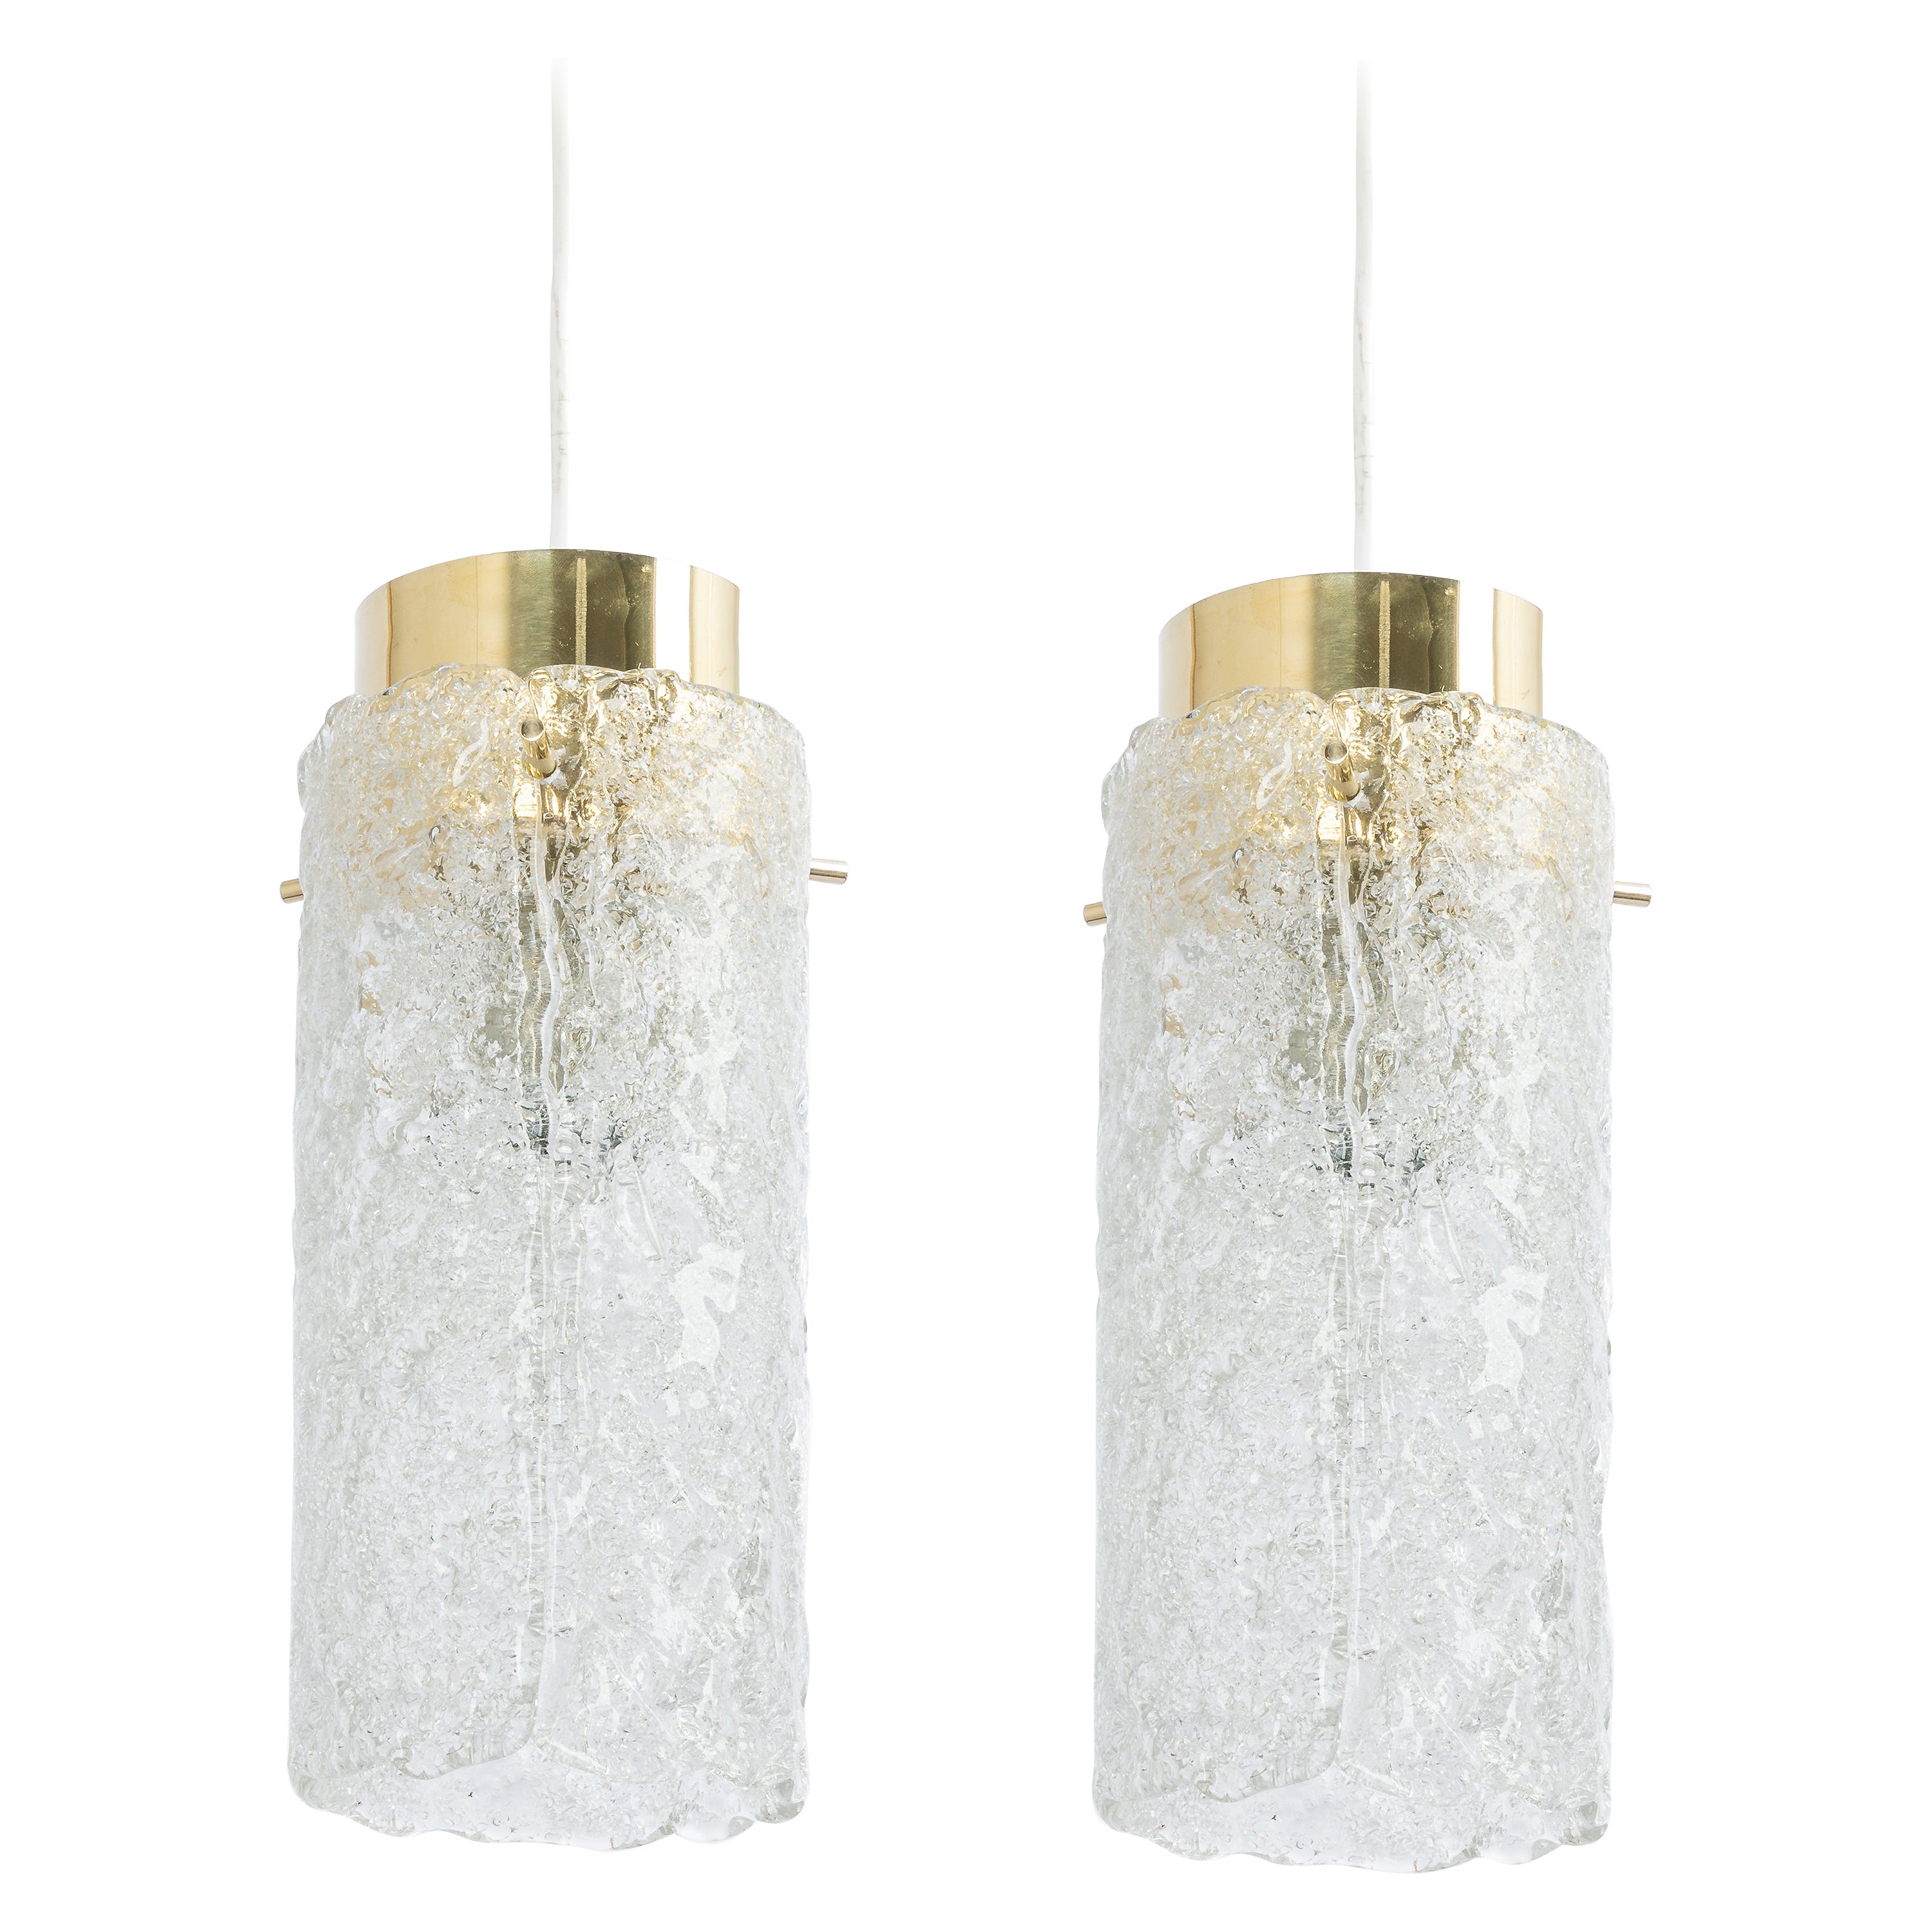 1 of 2 Petite Murano Pendant Lights by Hillebrand, 1960s For Sale